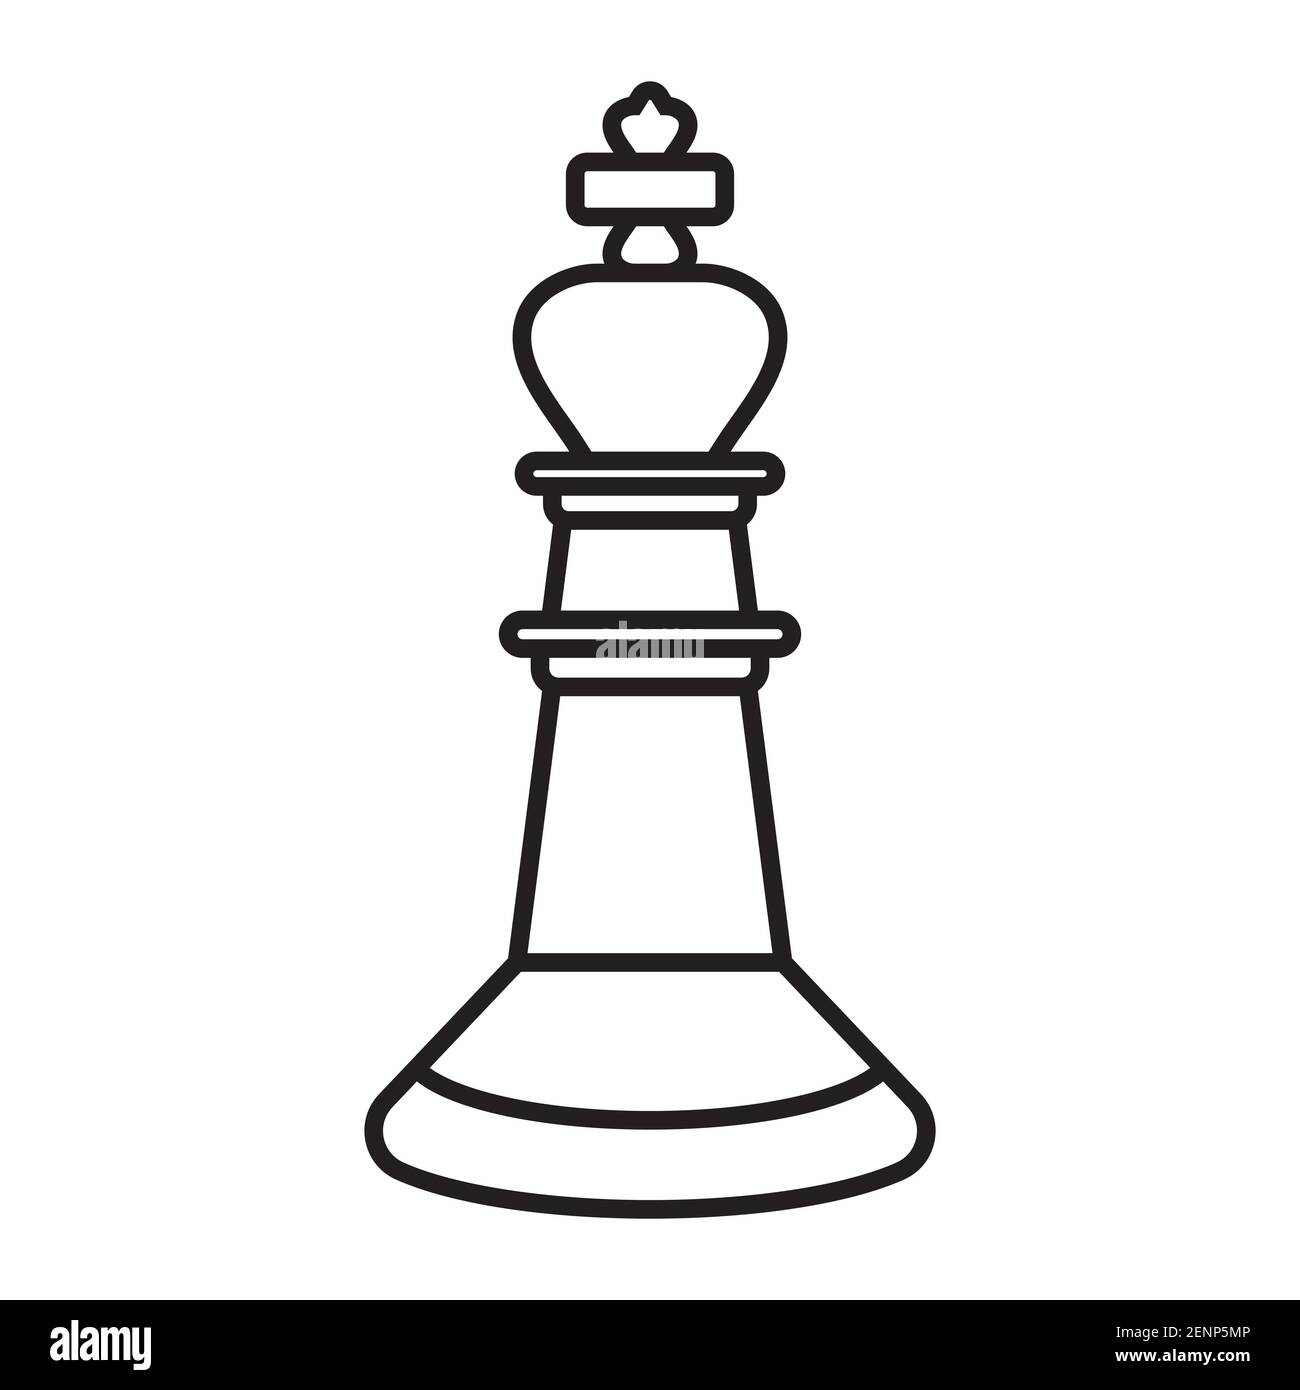 Pawn chess piece line art vector icon for apps or website Stock